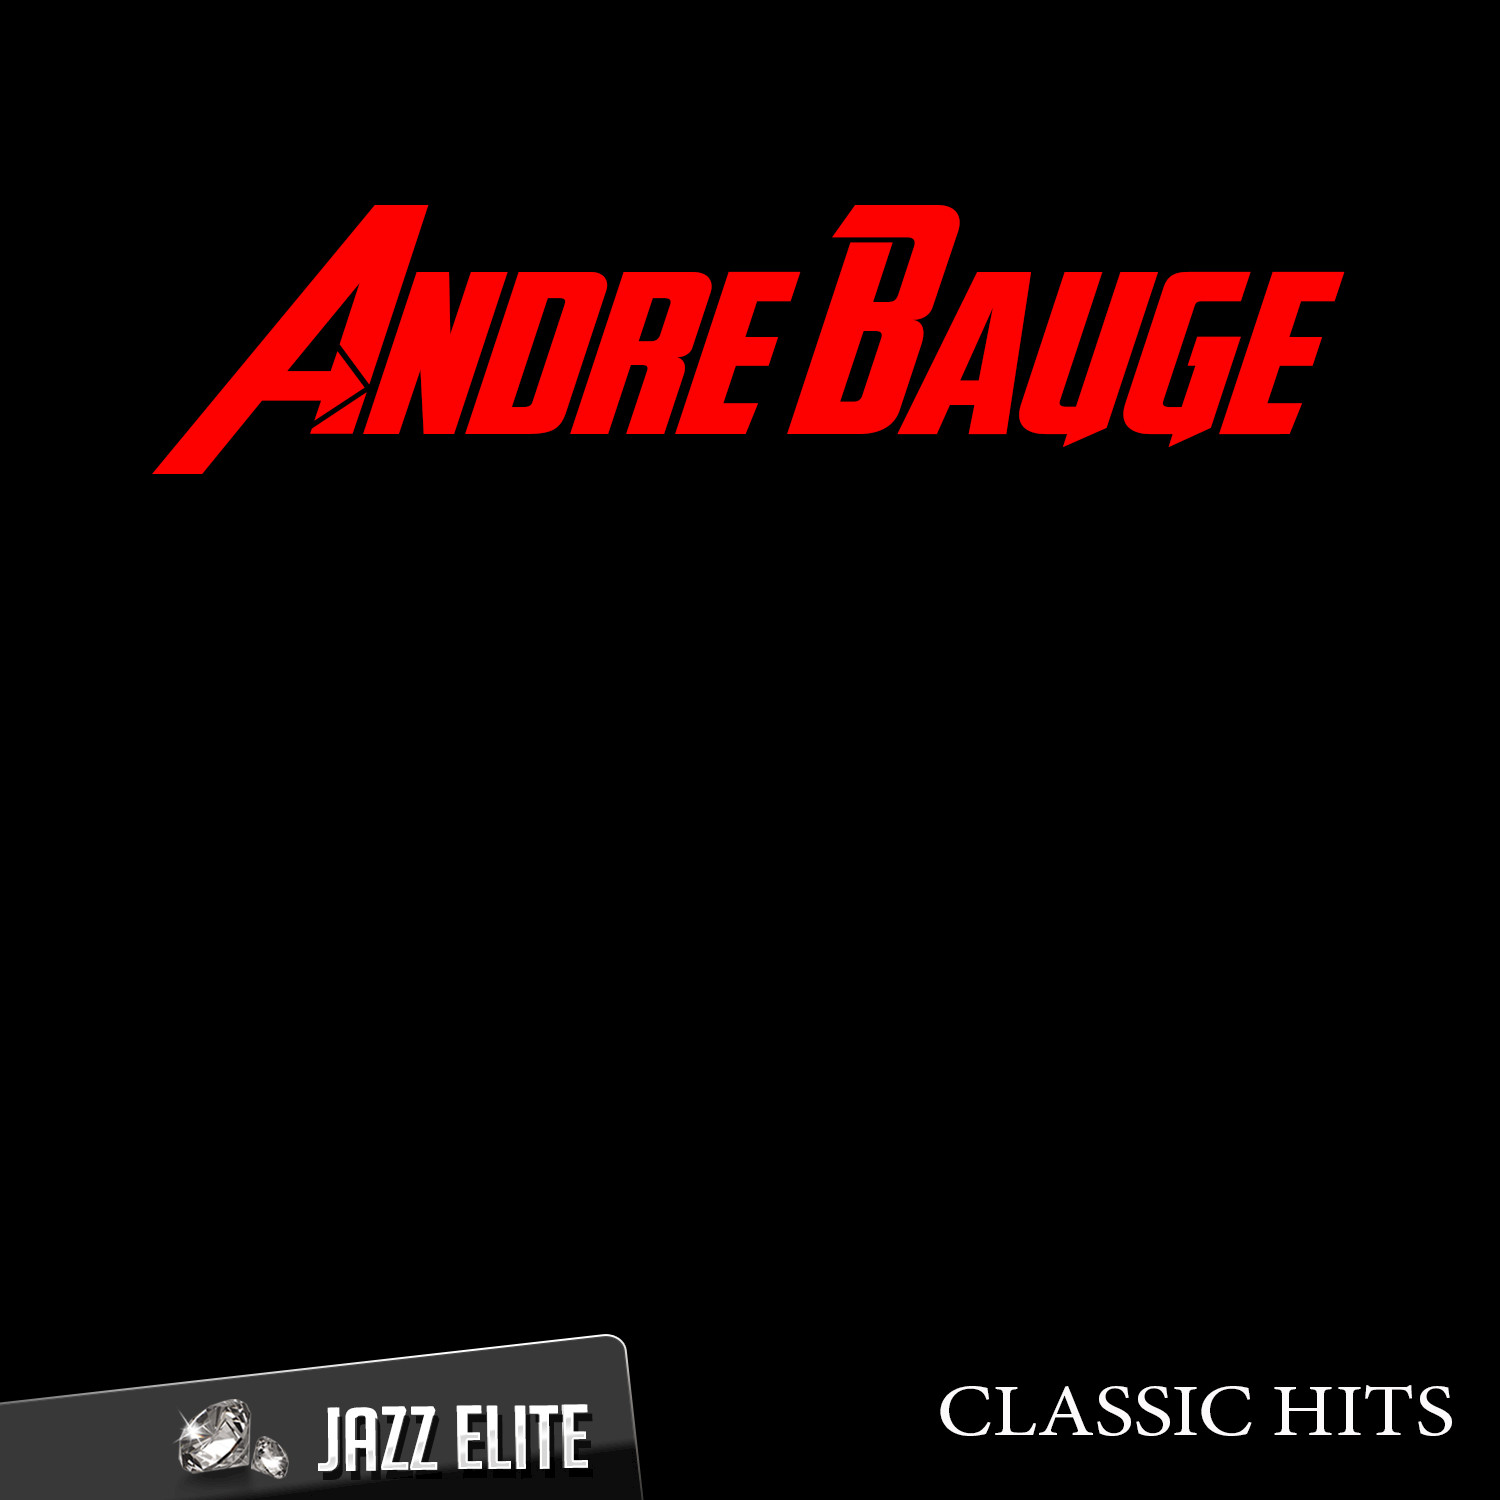 Classic Hits By Andre Bauge